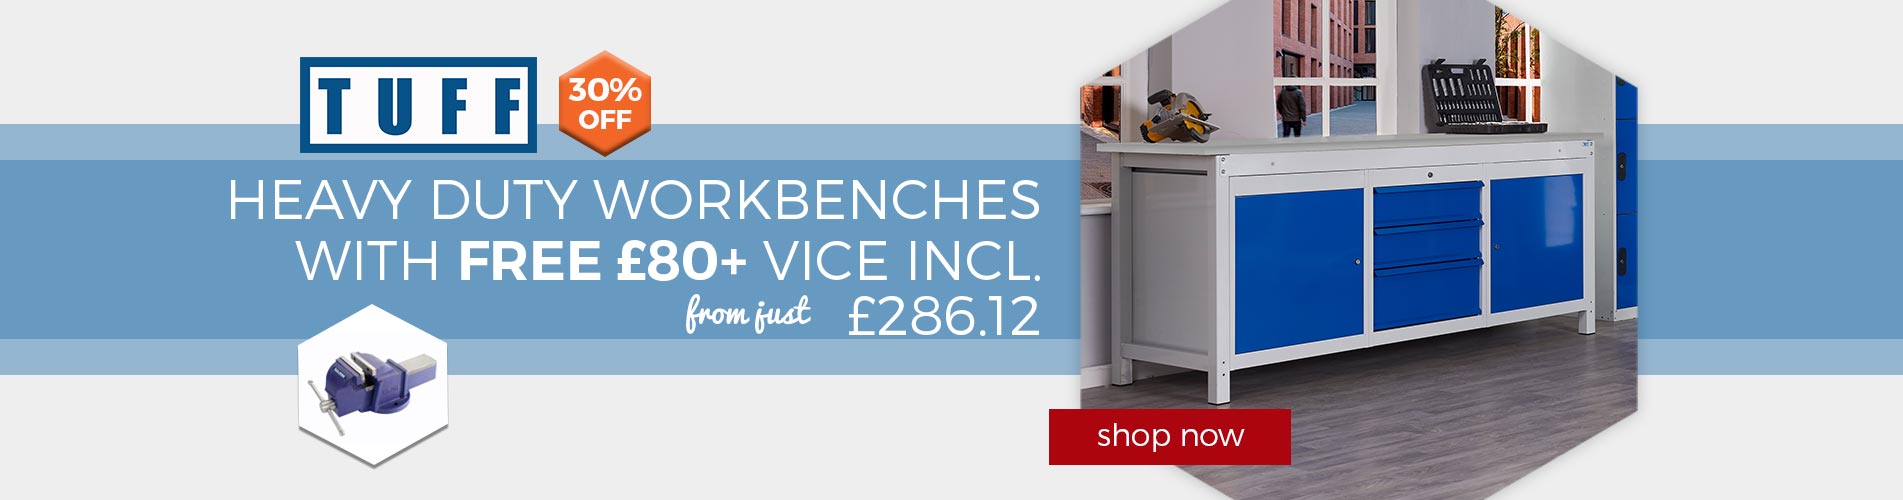 New TUFF Workbenches with Free Gift